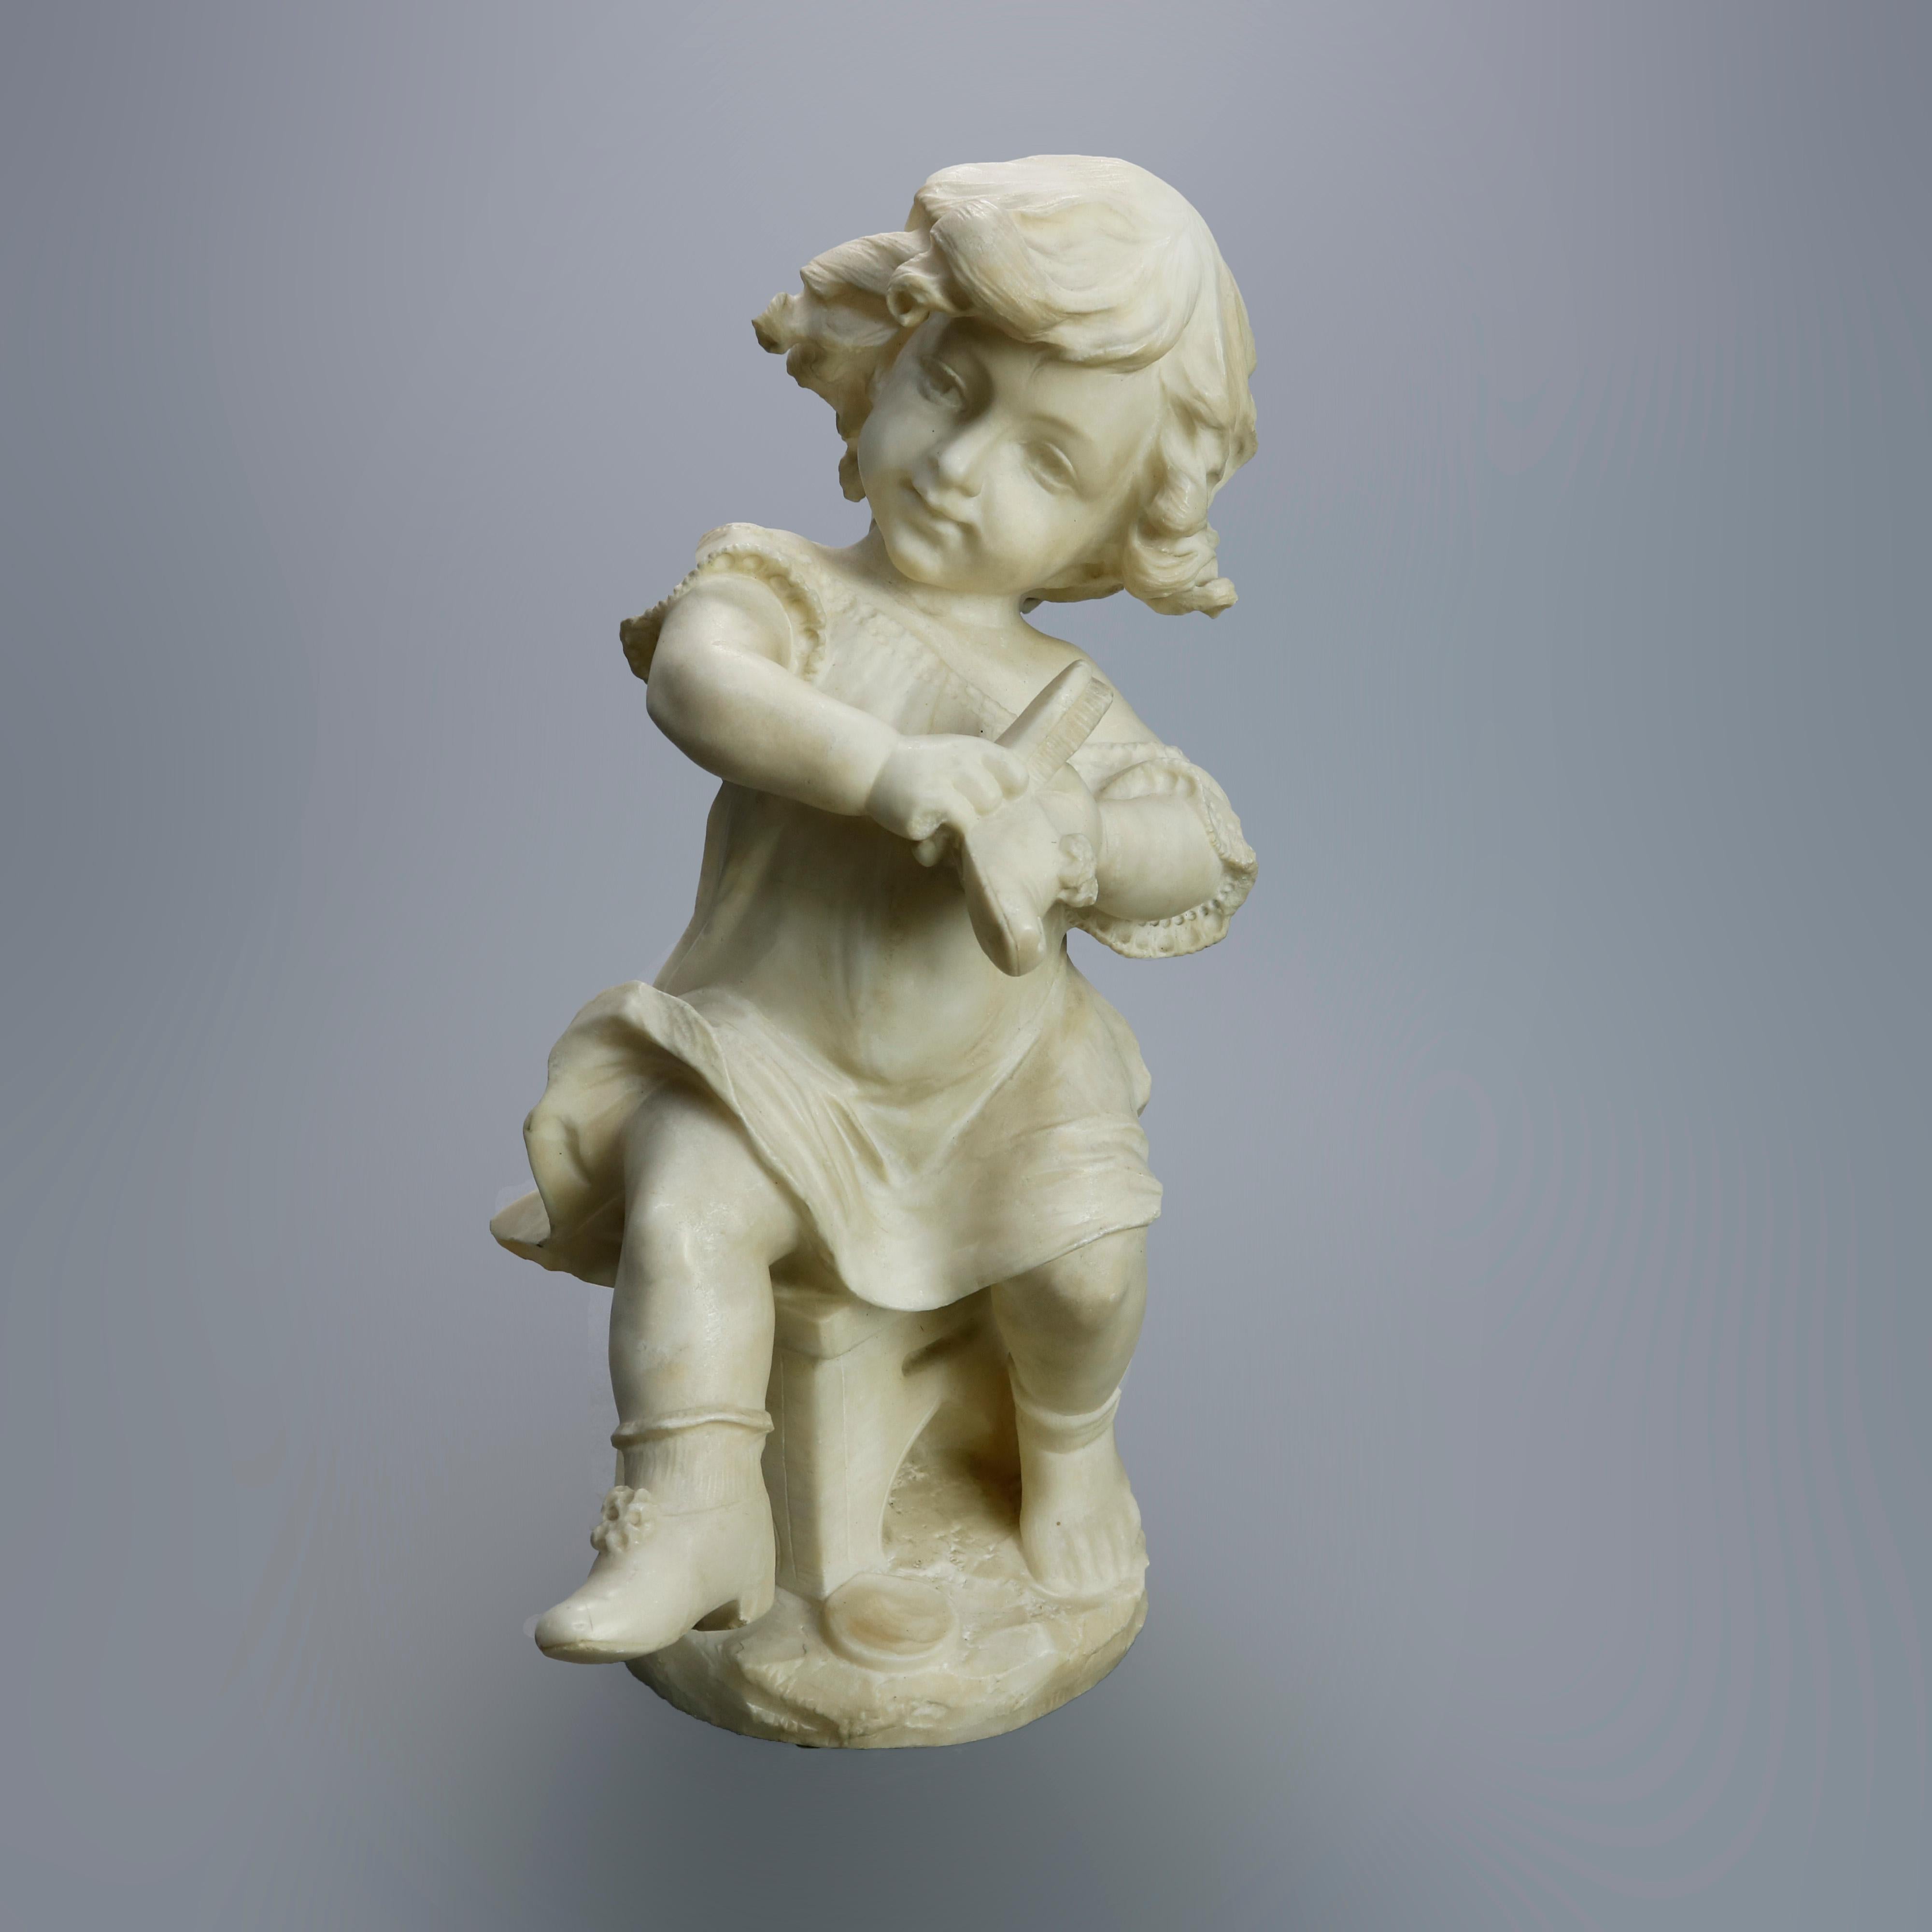 Antique Carved Alabaster Sculpture of Young Girl by Adolpho Cipriani, c1890 9